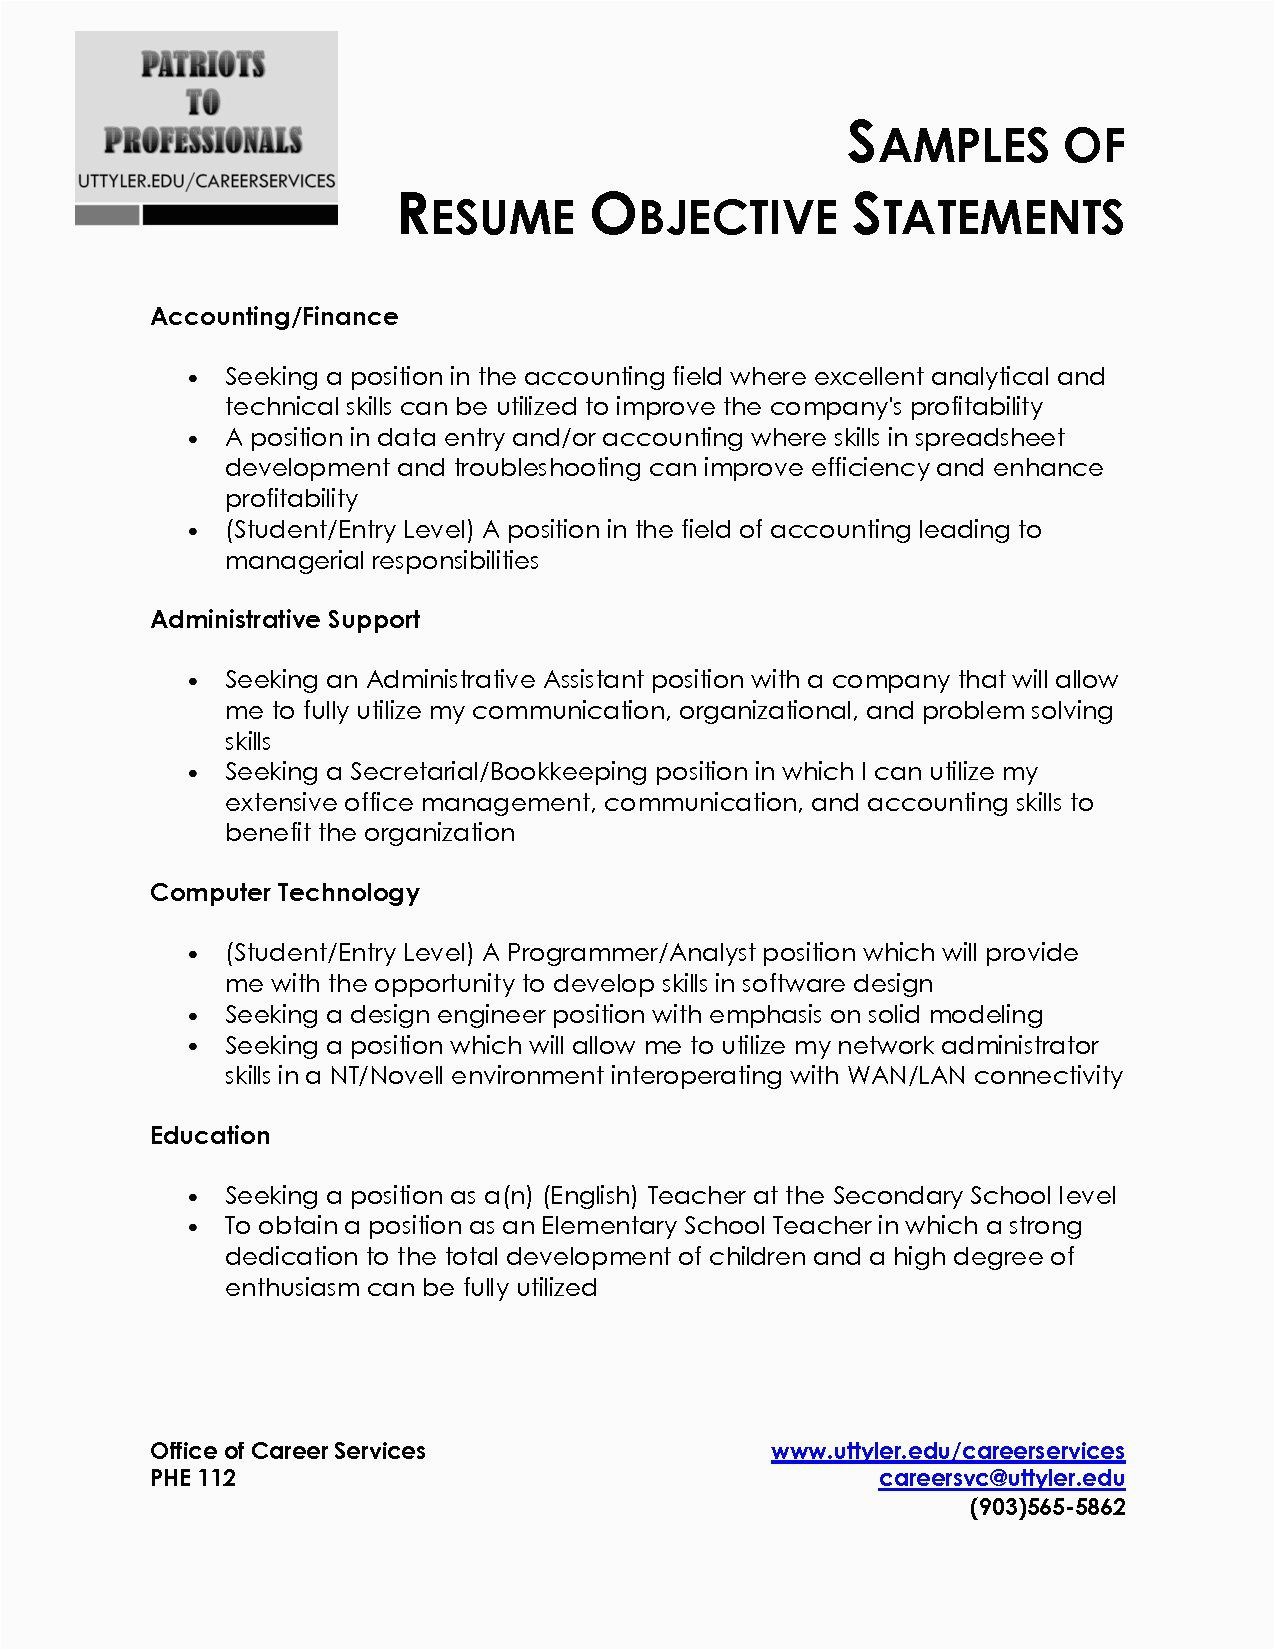 Samples Of A Objective for Resumes Sample Resume Objective Statement Free Resume Templates